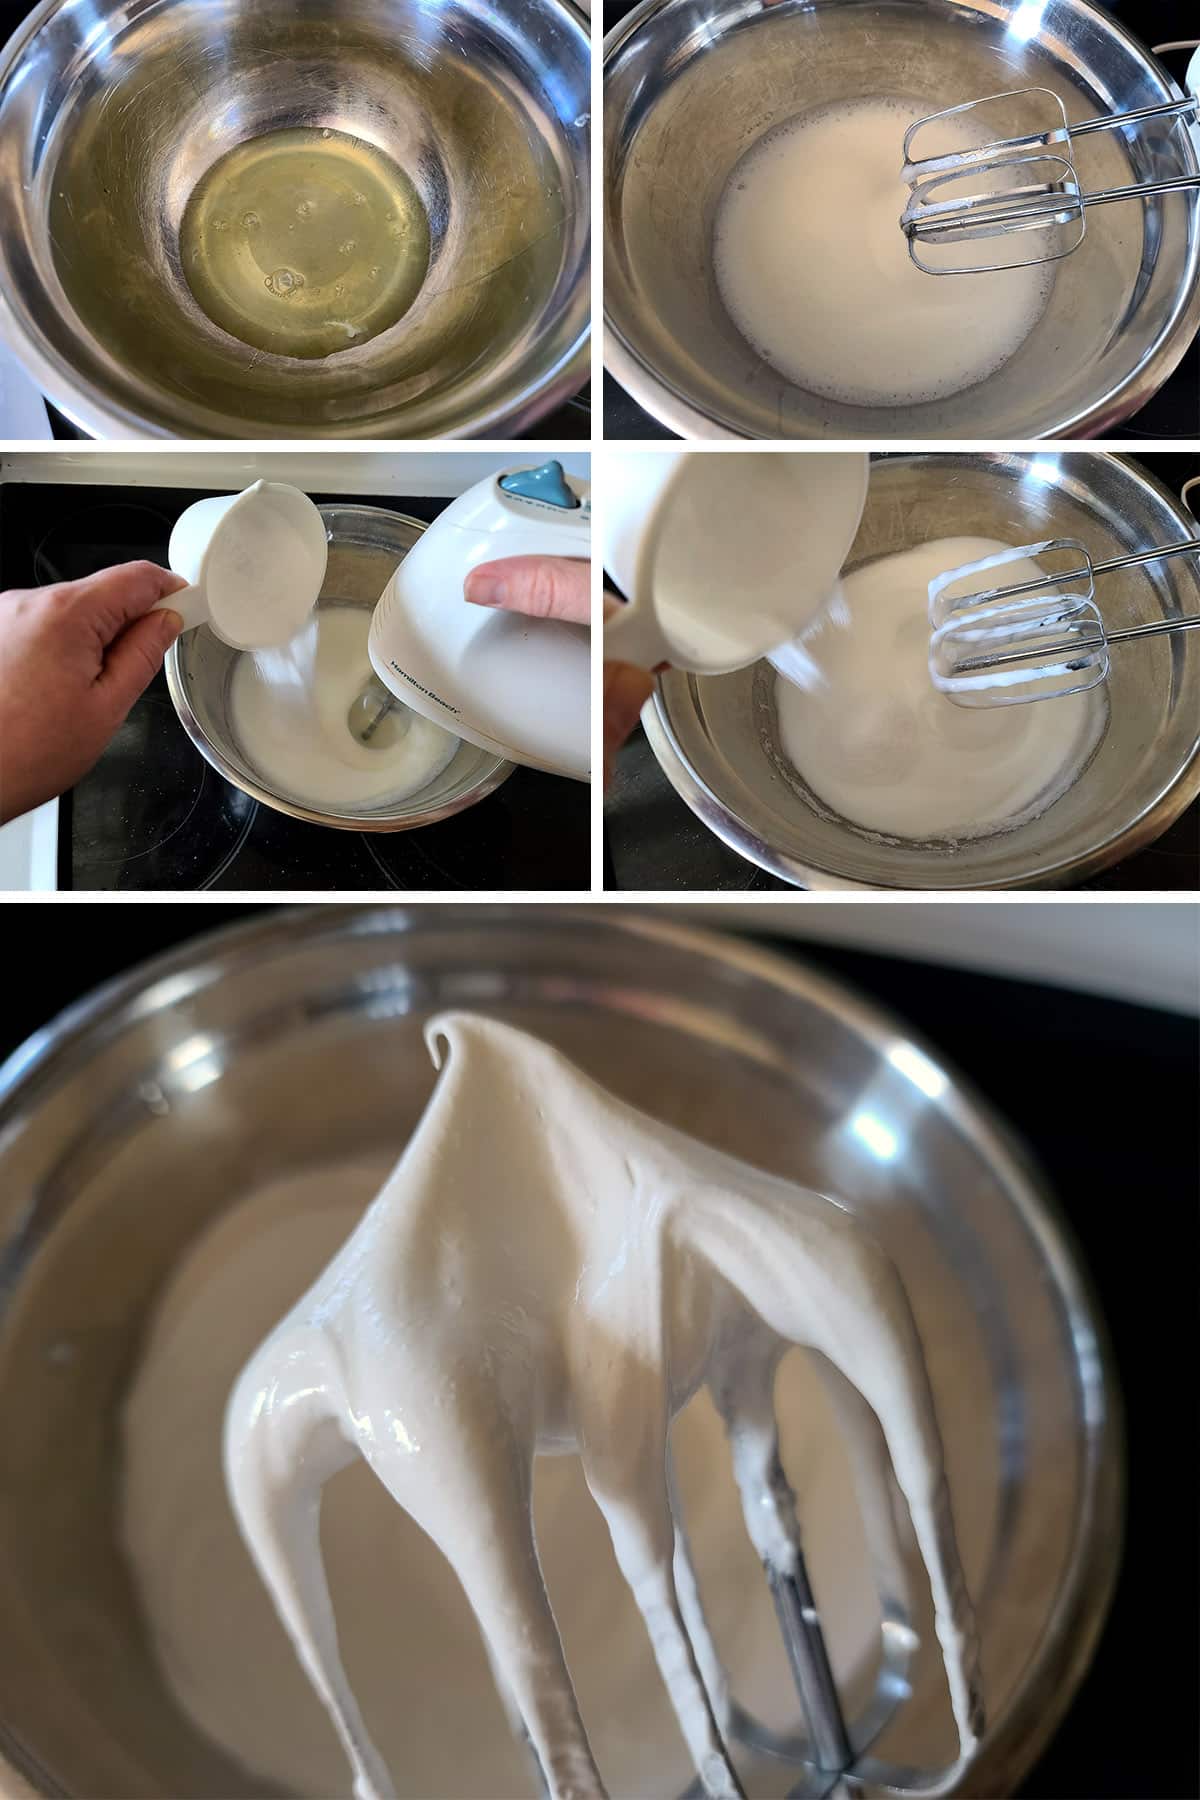 A 5 part image showing the pavlova meringue mixture being made.